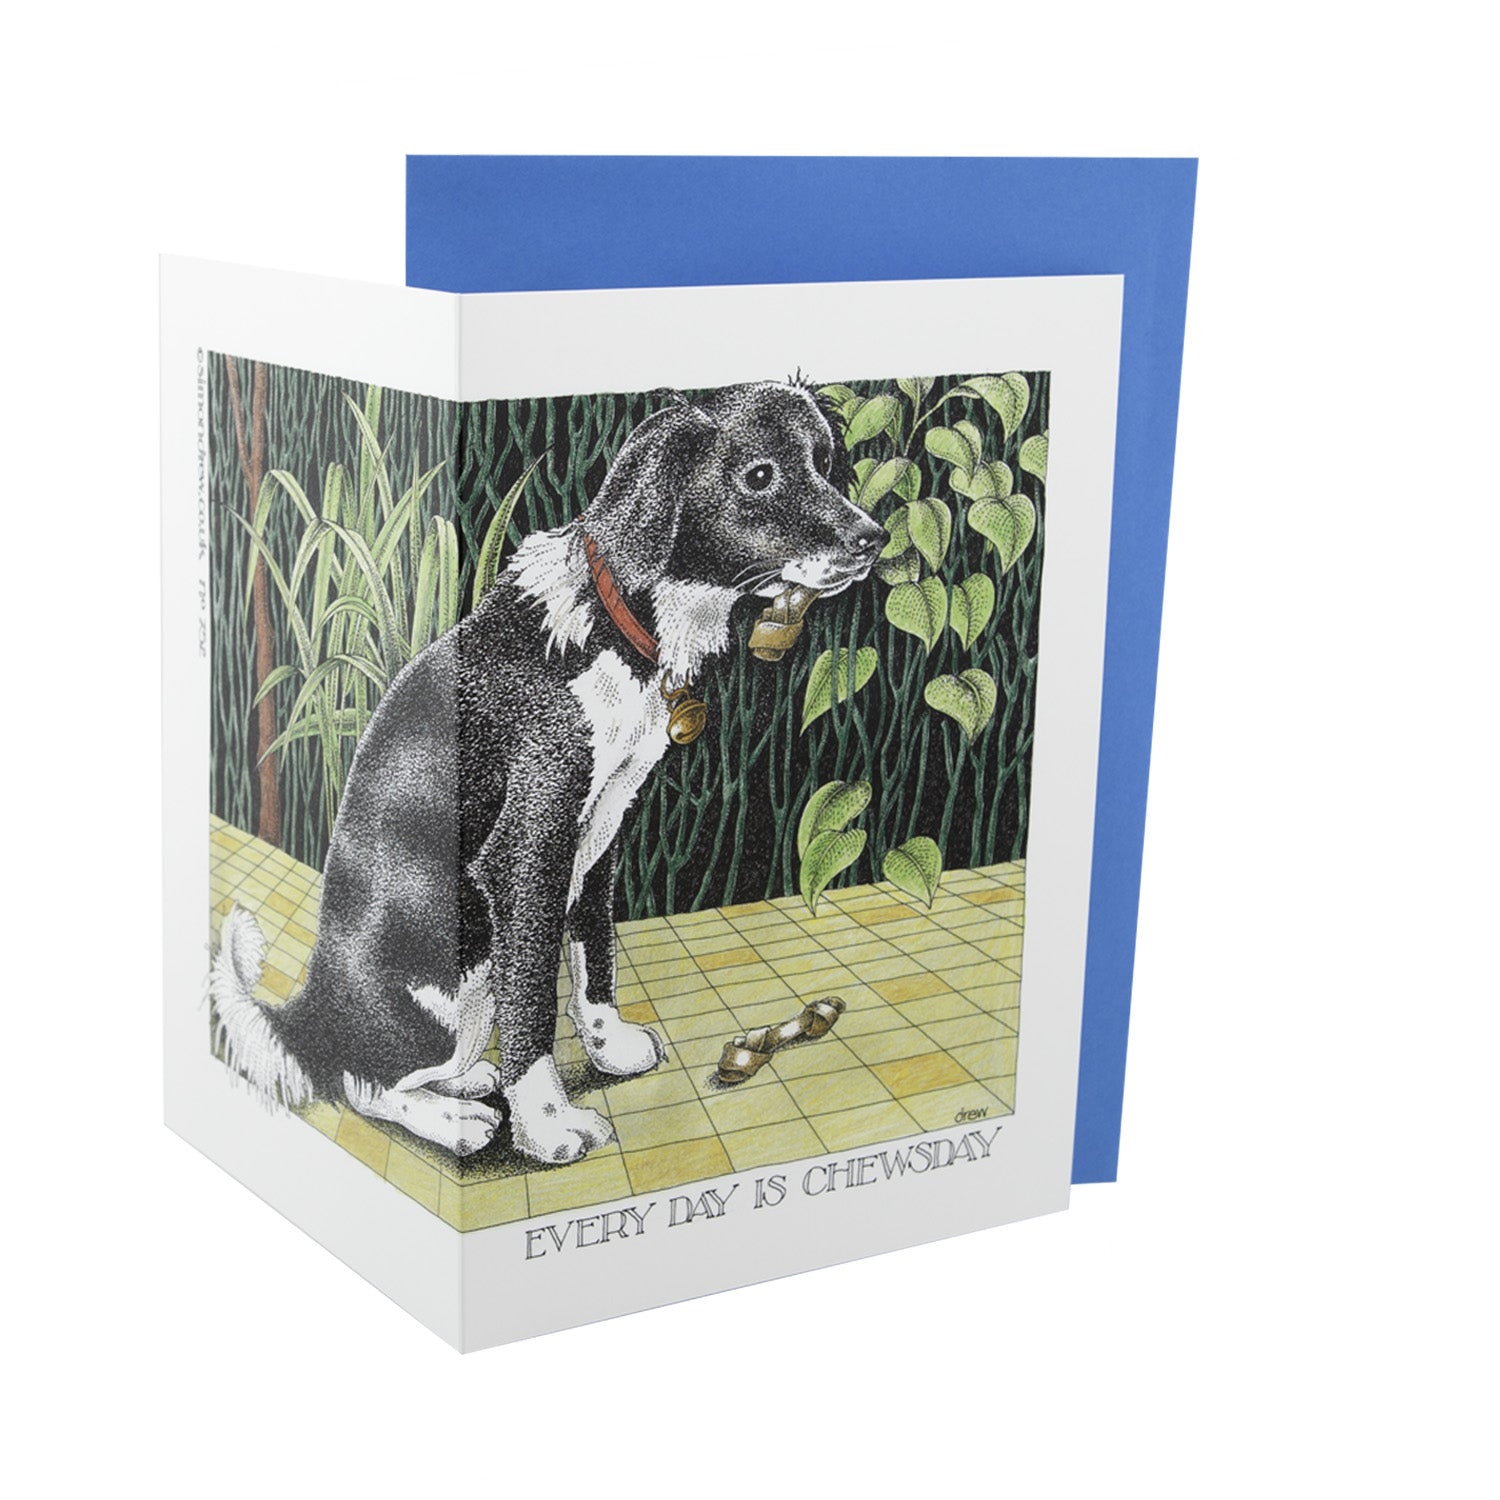 Dog Lover Gifts available at Dog Krazy Gifts - Everyday Is Chewsday Card - Part of the Simon Drew dog collection available from Dog Krazy Gifts